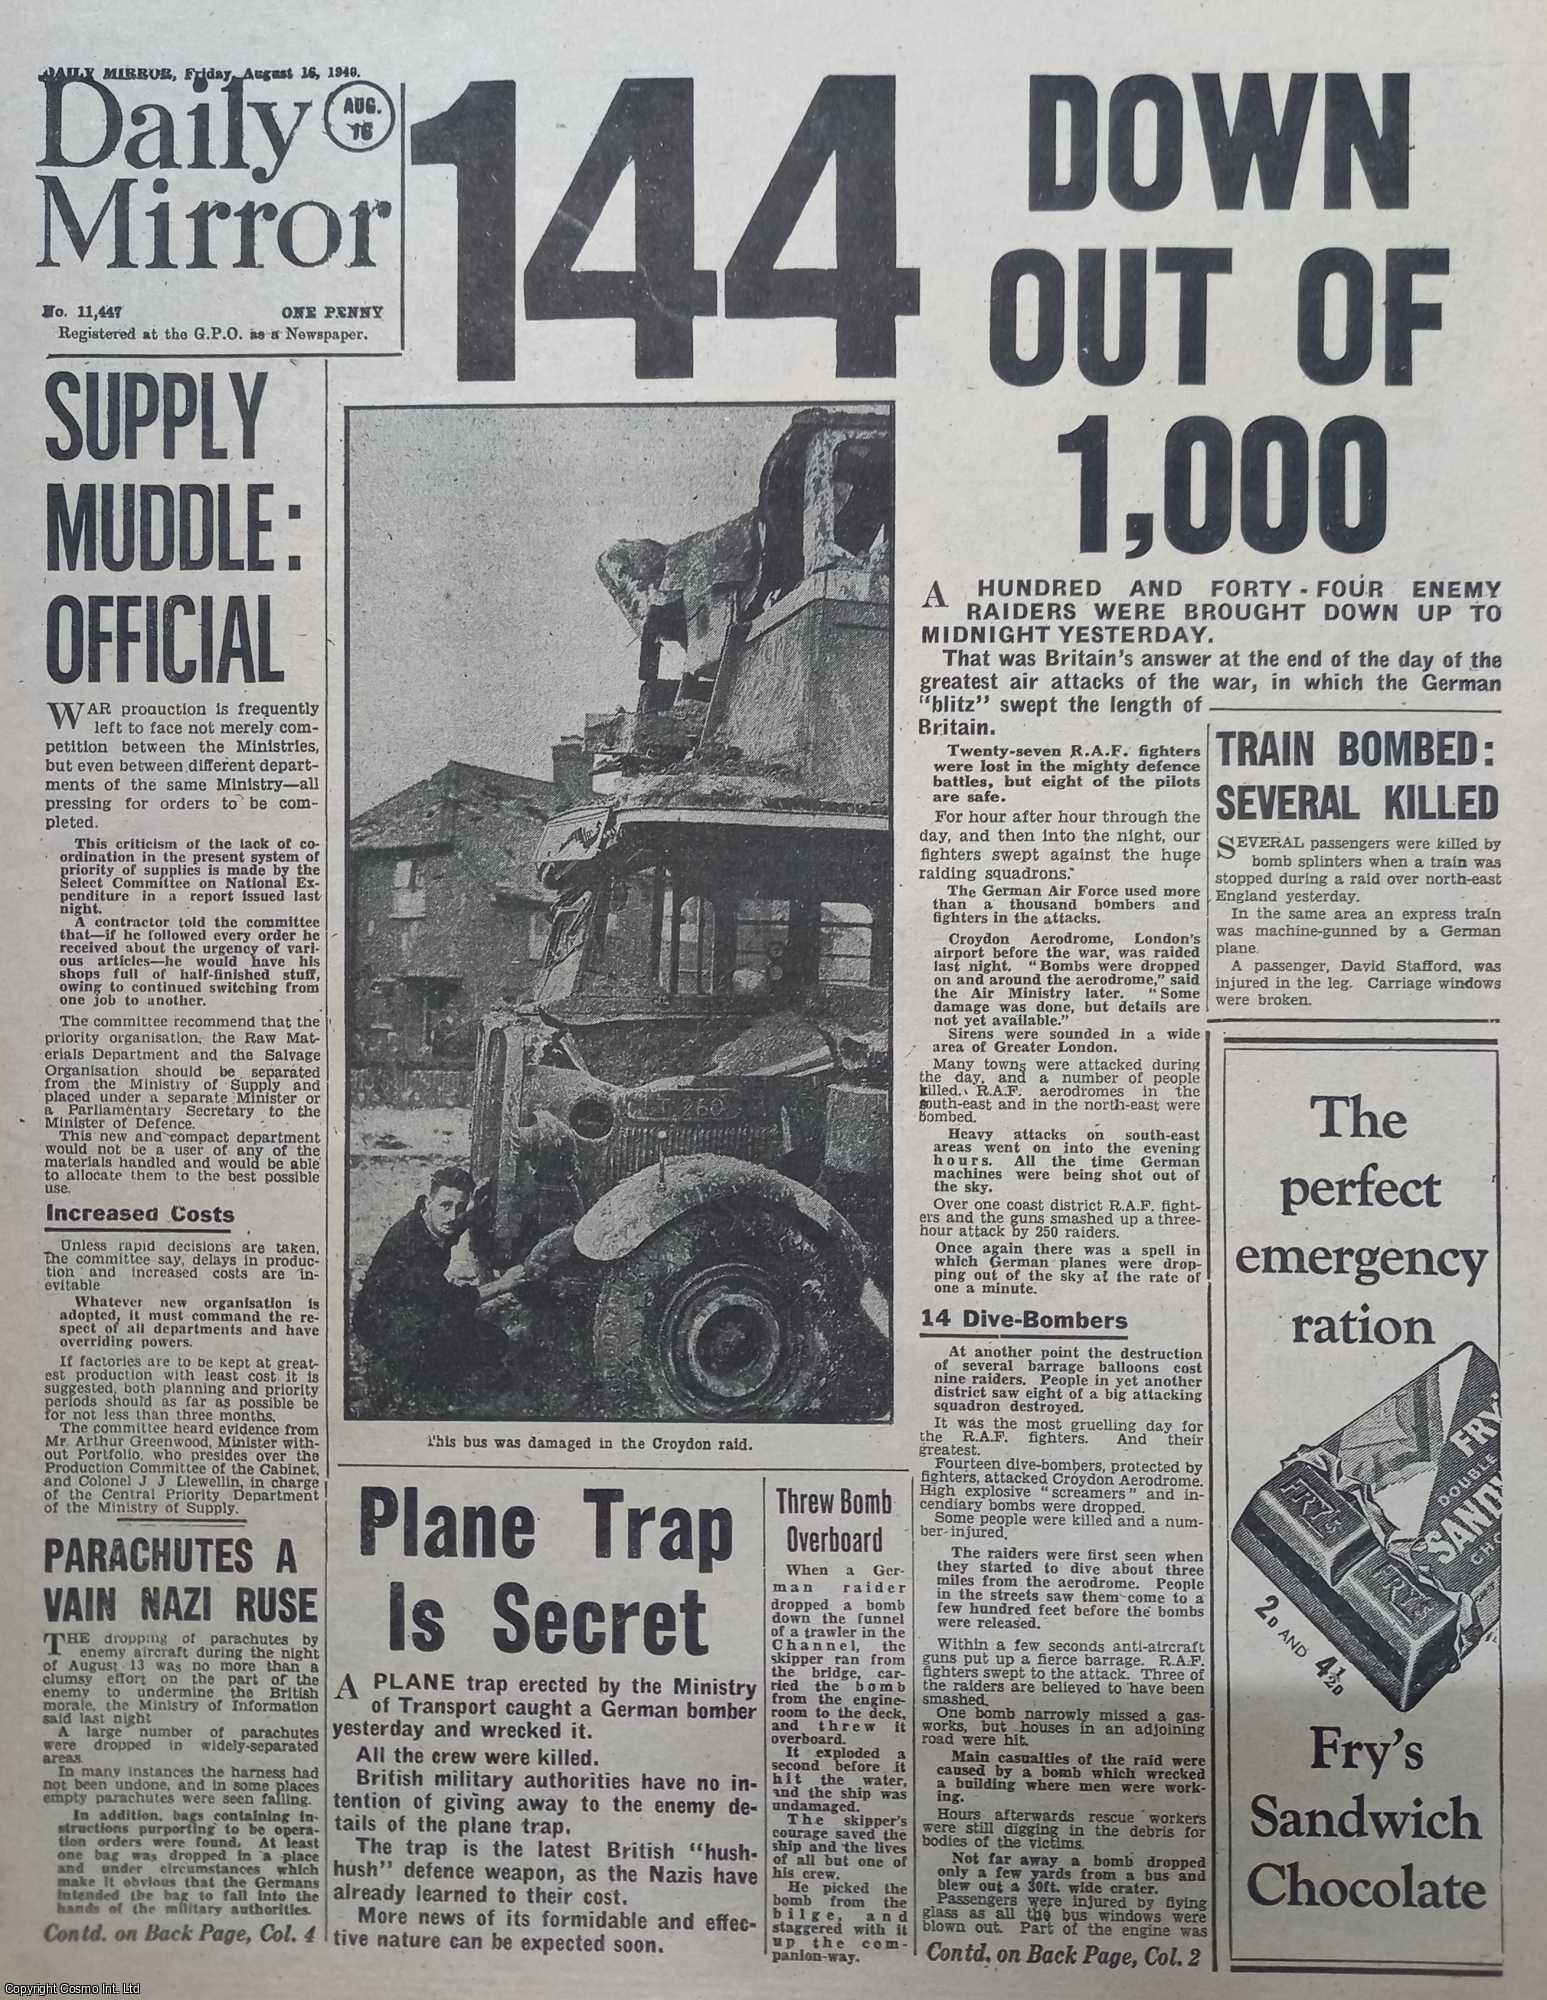 WORLD WAR TWO - 144 Down Out Of 1,000. The Daily Mirror, August 16, 1940. A modern reprint of the entire WW2 newspaper.